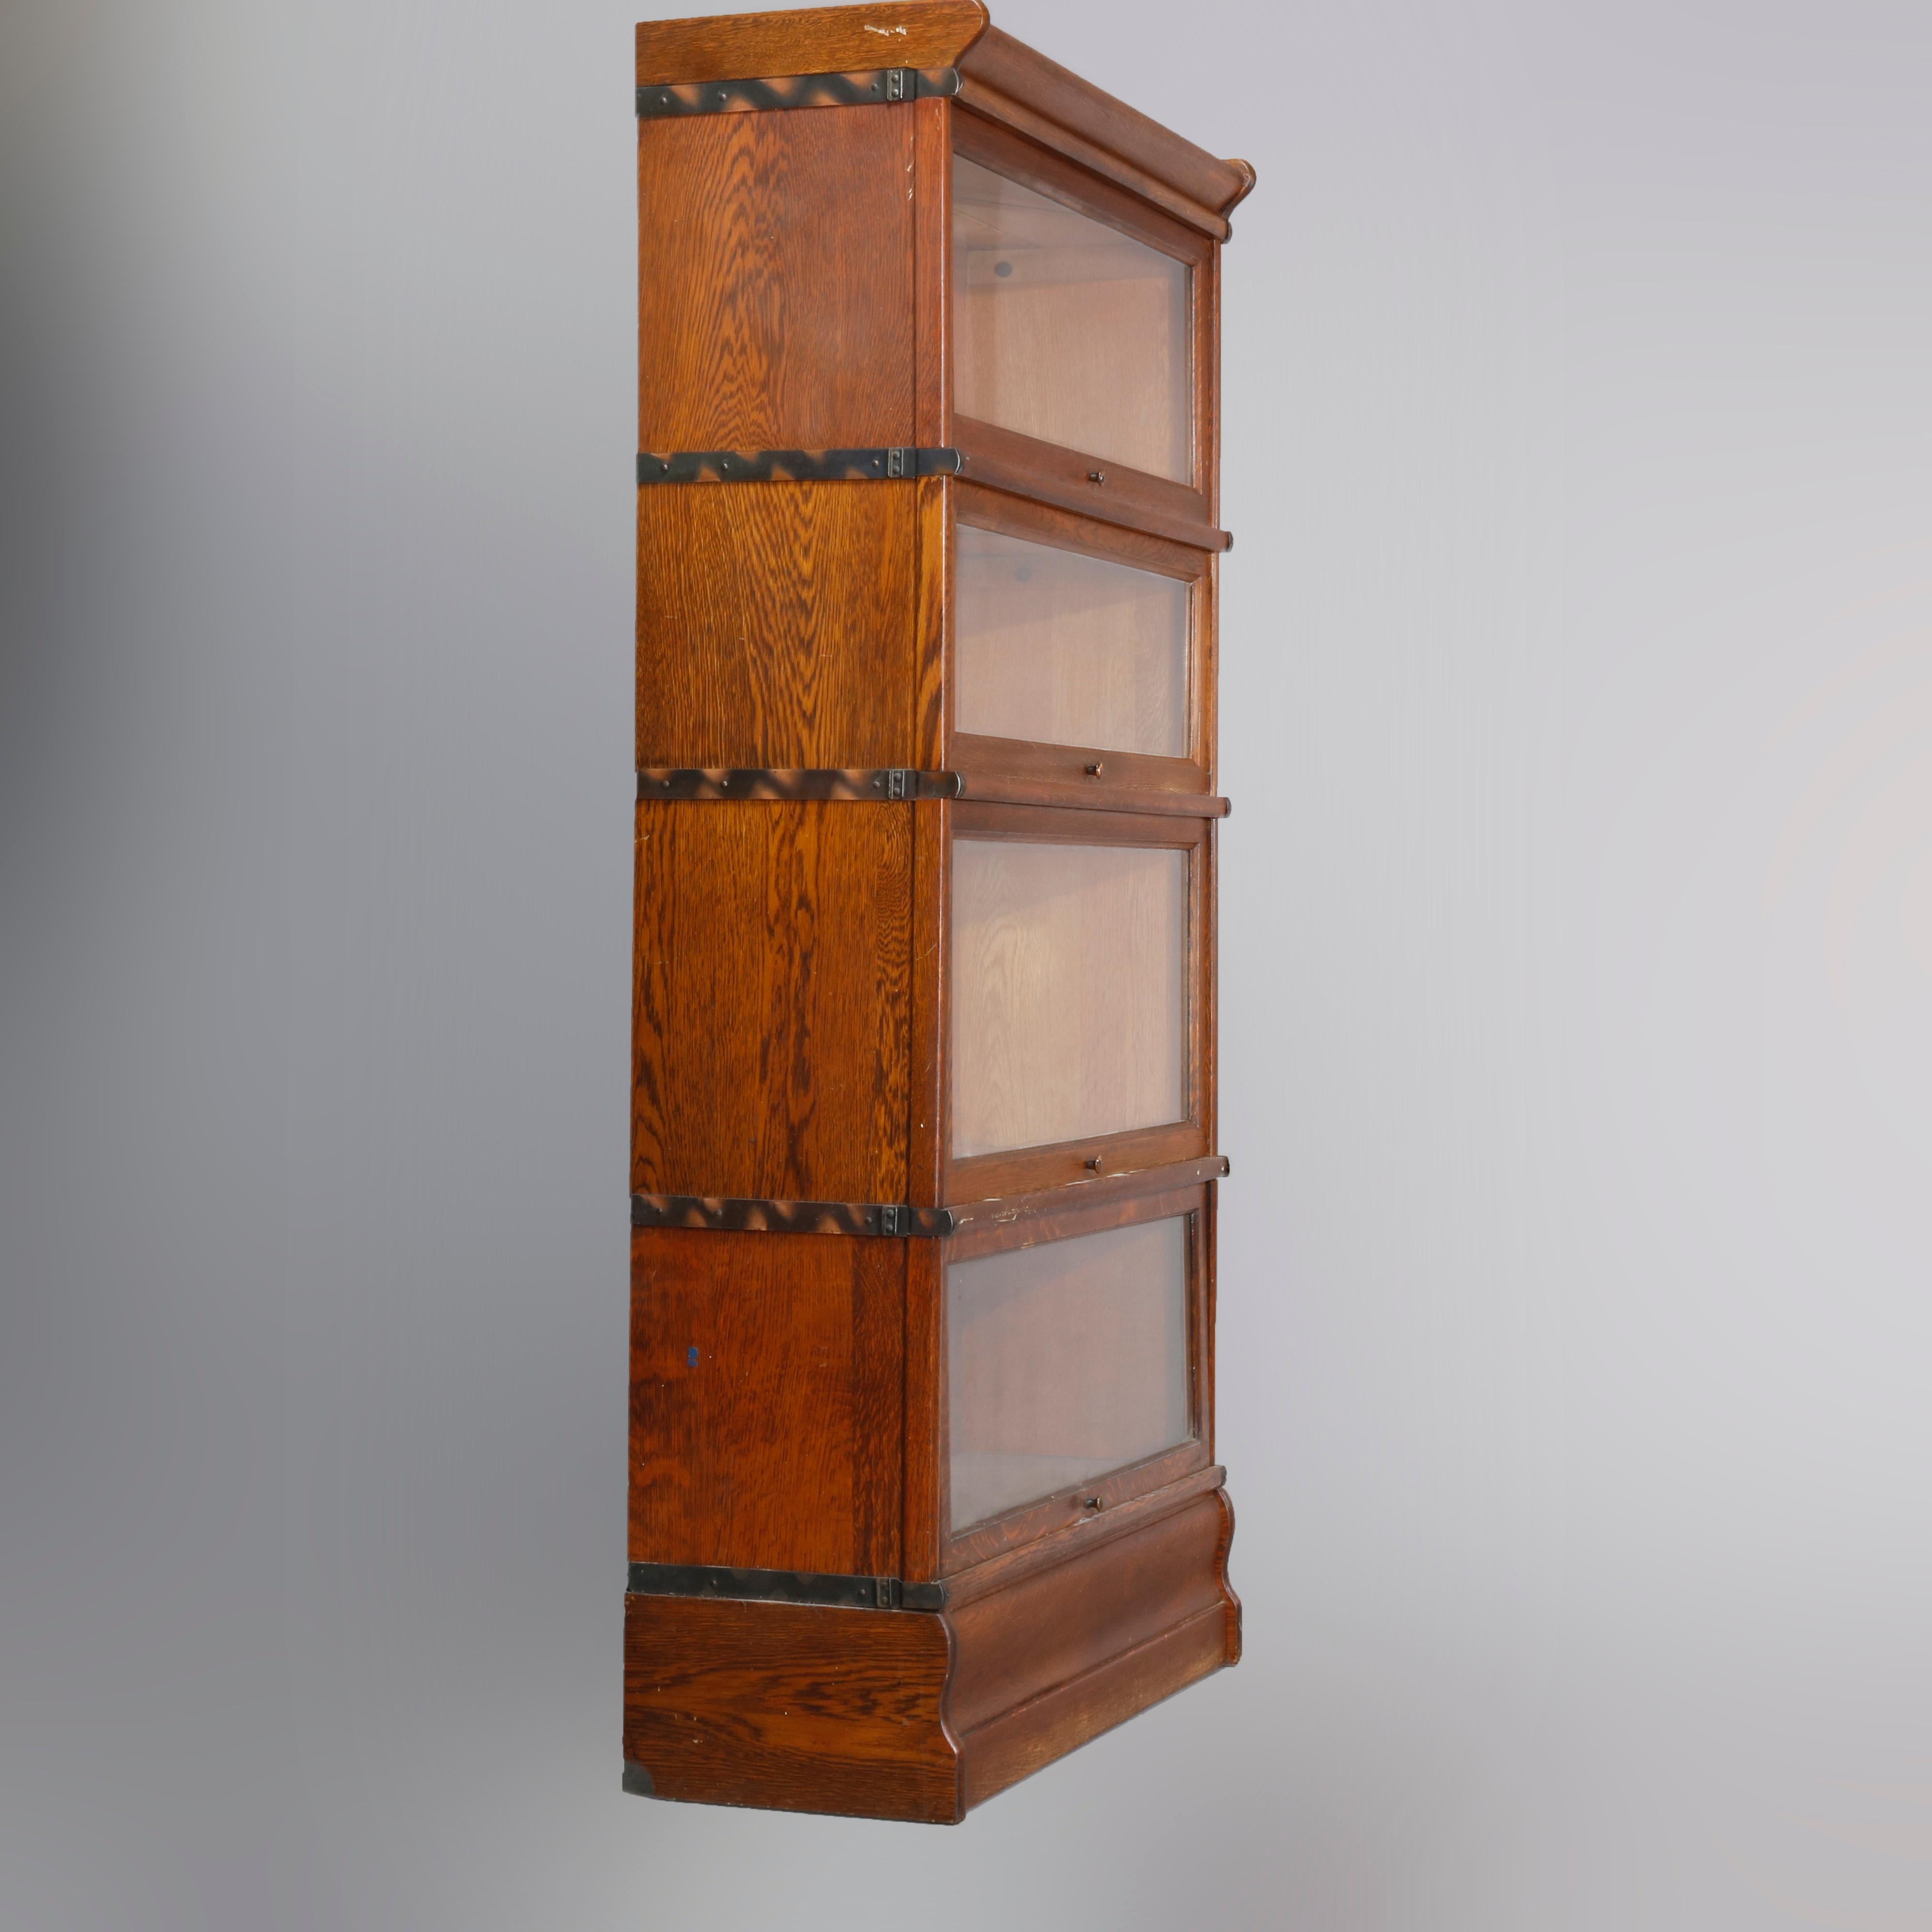 An Arts & Crafts sectional barrister bookcase in the manner of Globe-Wernicke, offers quarter sawn oak construction with four stacks each having a pull-down glass door on shaped base surmounted by removable crown, circa 1920

Measures: 60